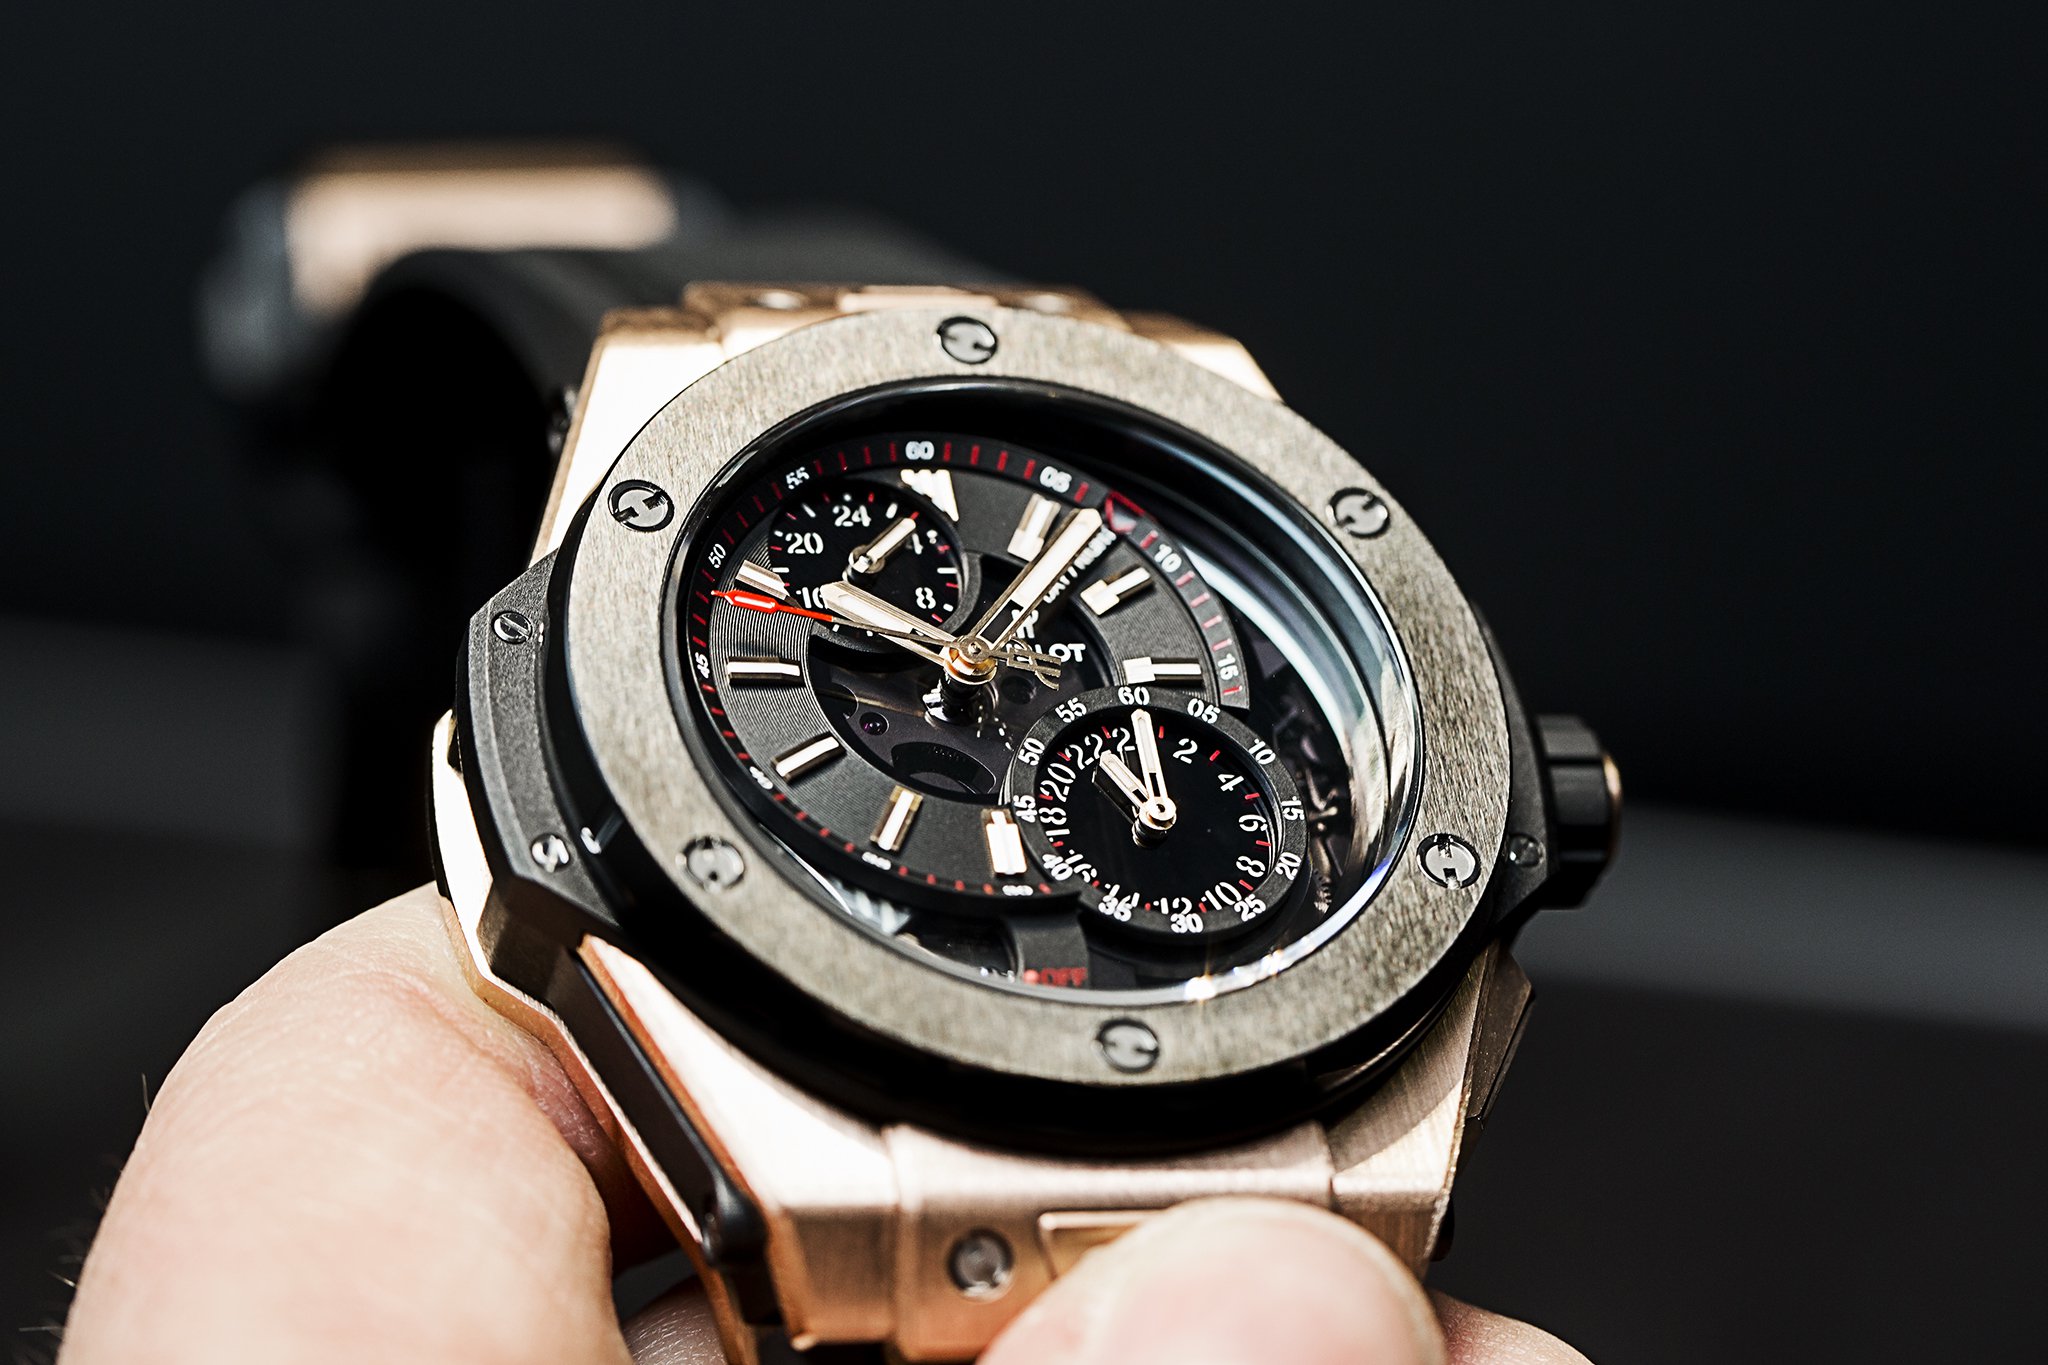 Hublot Big Bang Alarm Repeater Watch in King Gold Hands On